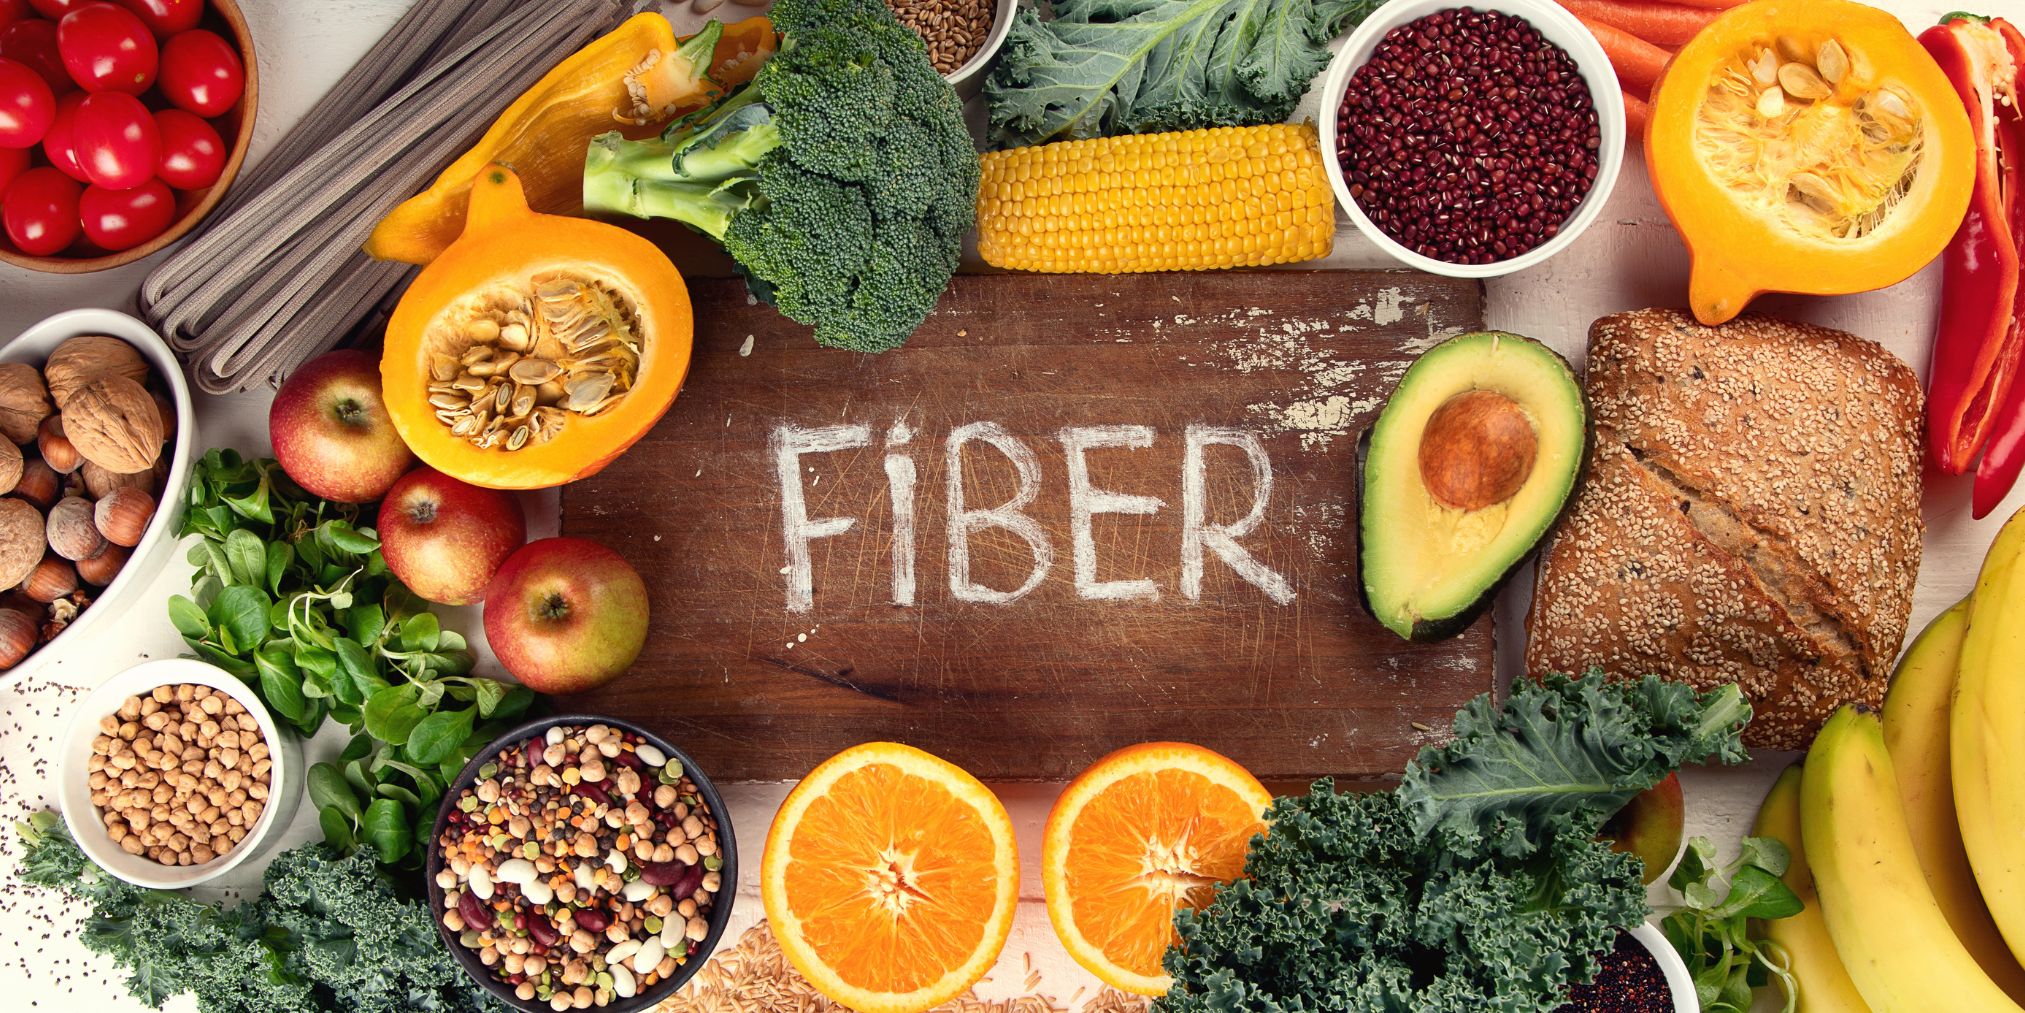 fiber written on a cutting board surrounded by foods high in fiber